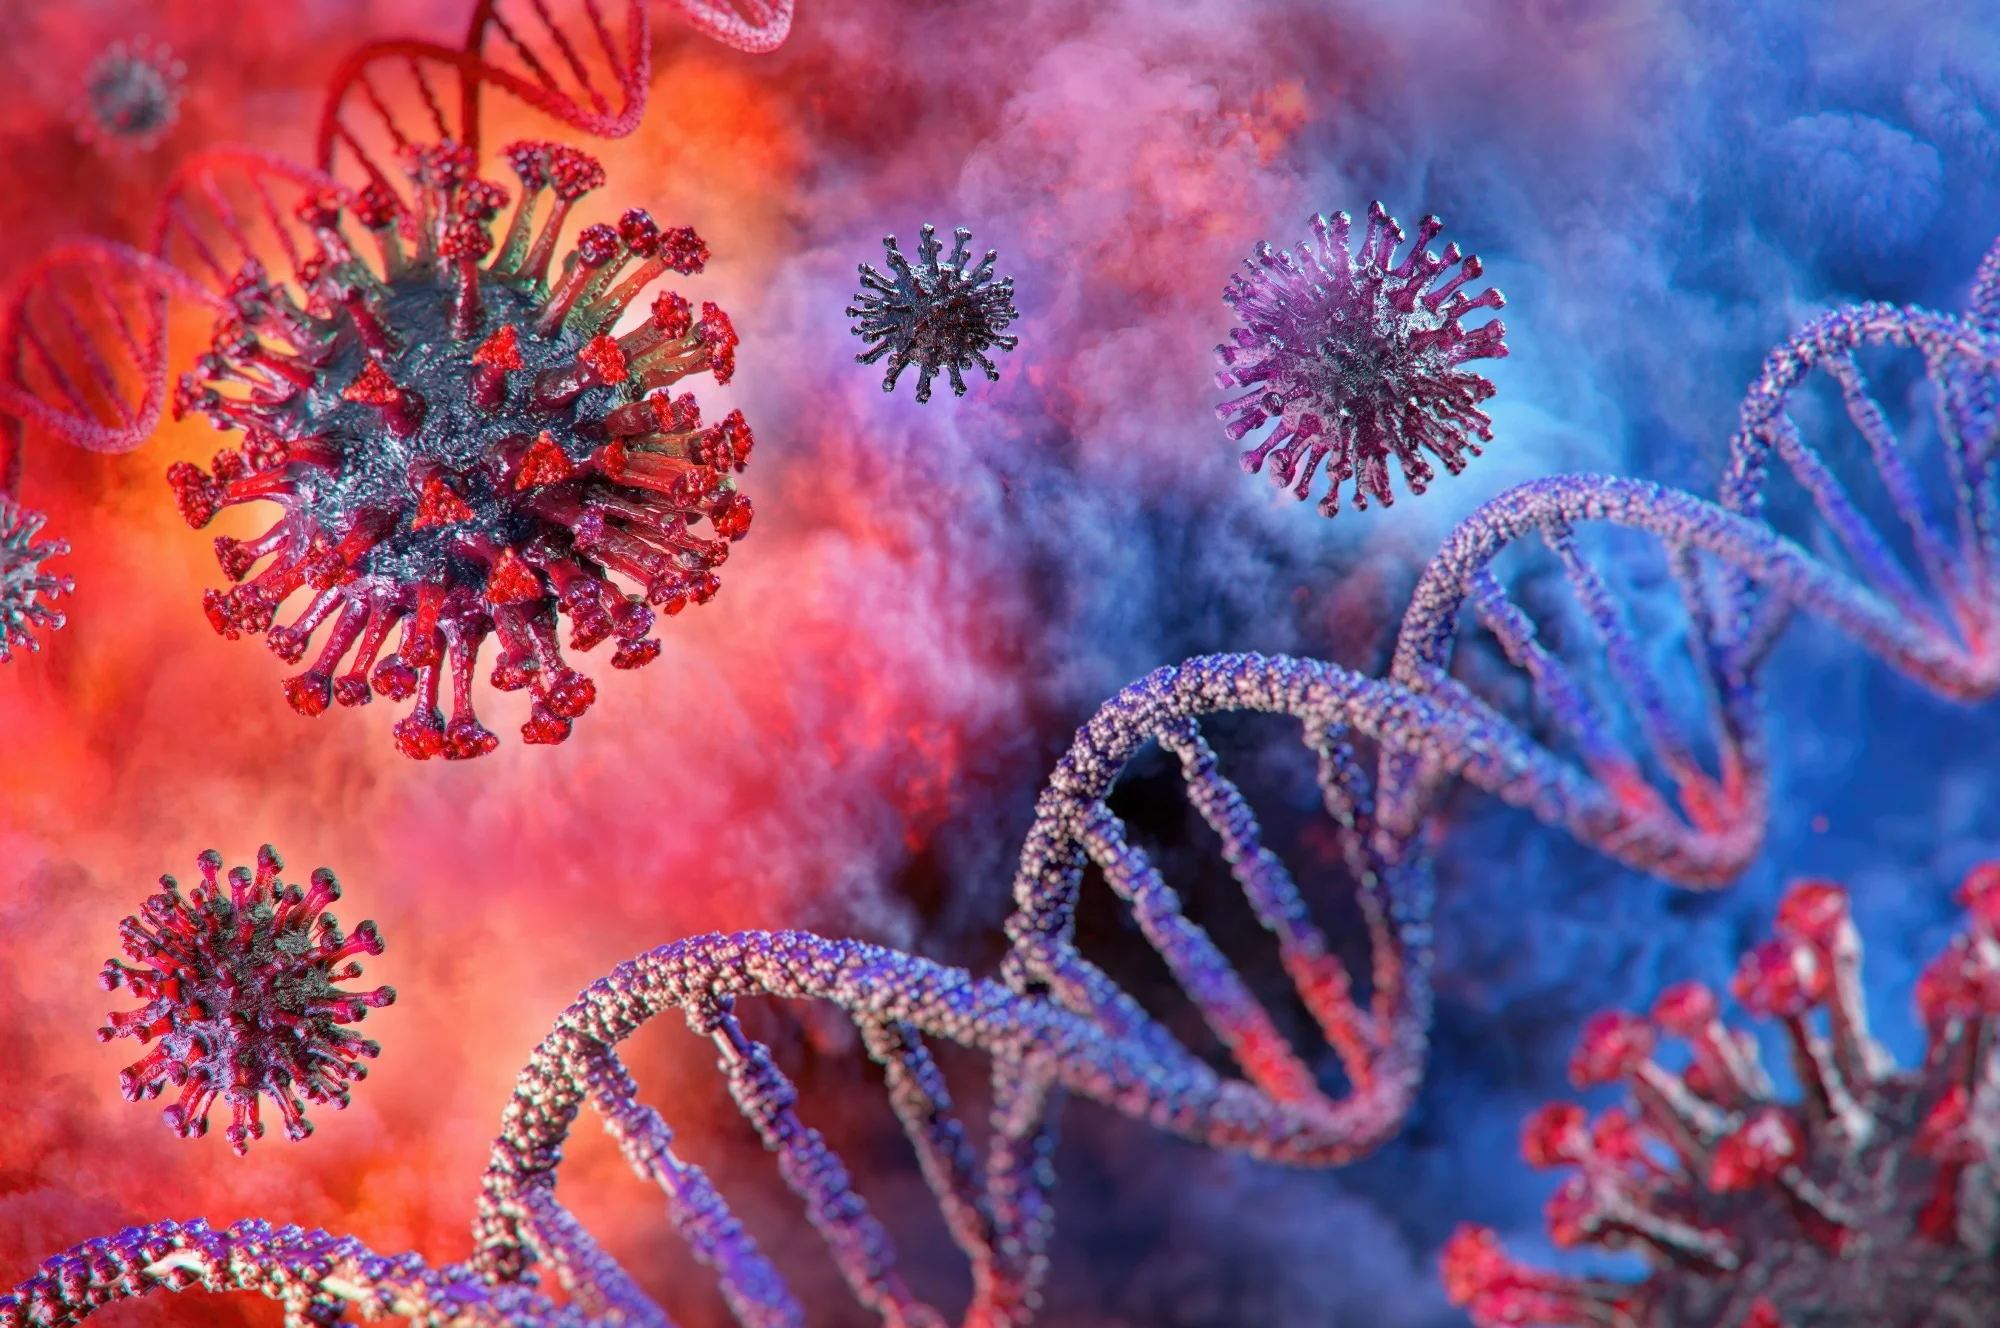 Possible Mutations in DNA Caused by COVID Vaccine or Infection Could Result in Cancer